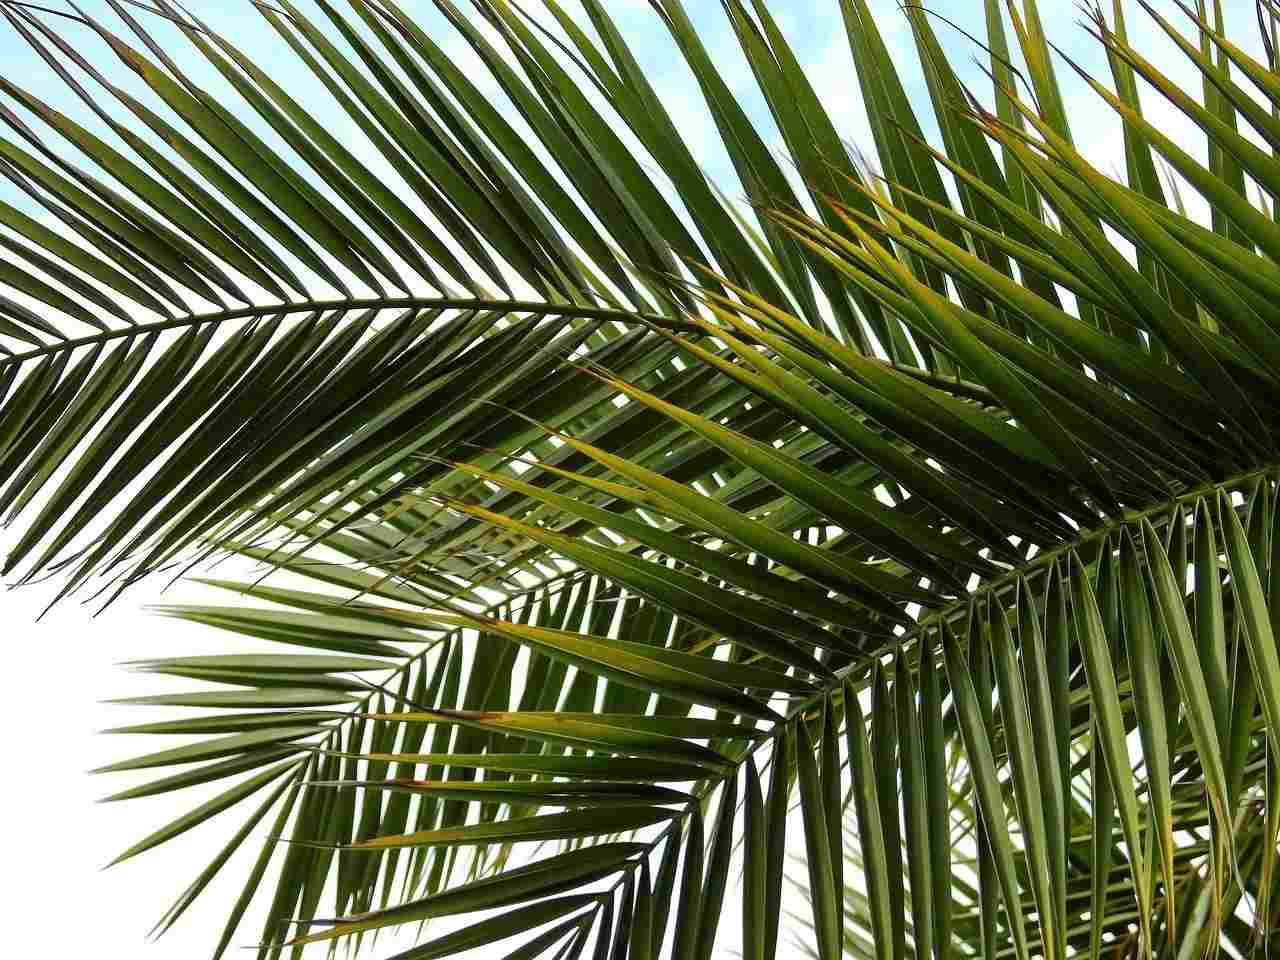 pygmy date palm is an excellent alternative for houseplant lovers